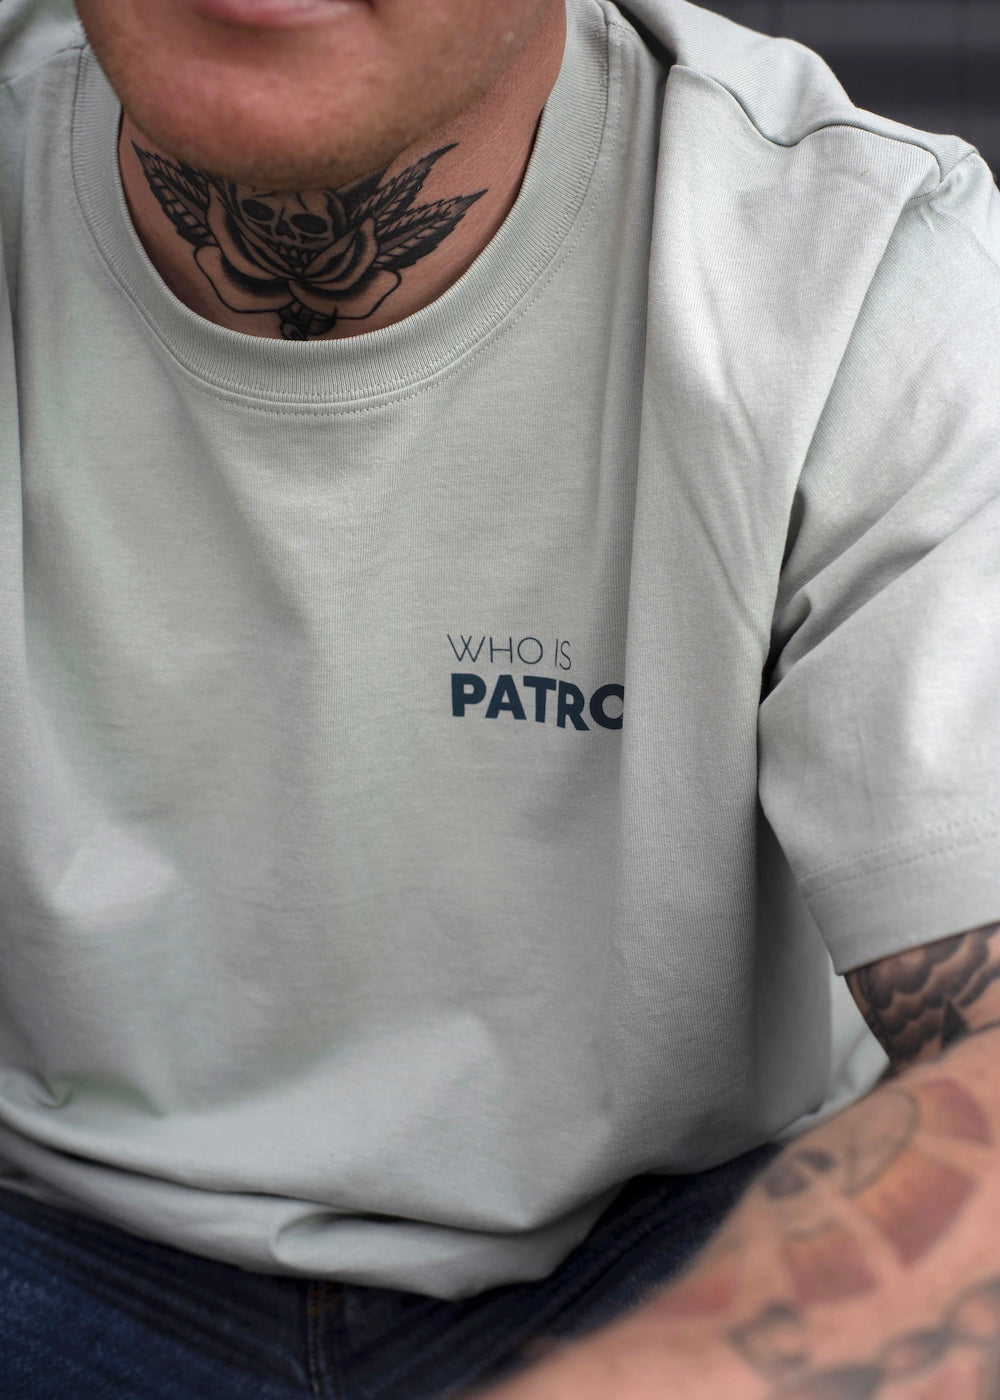 T-Shirt - "Who is Patron? You are Patron." - Aloe